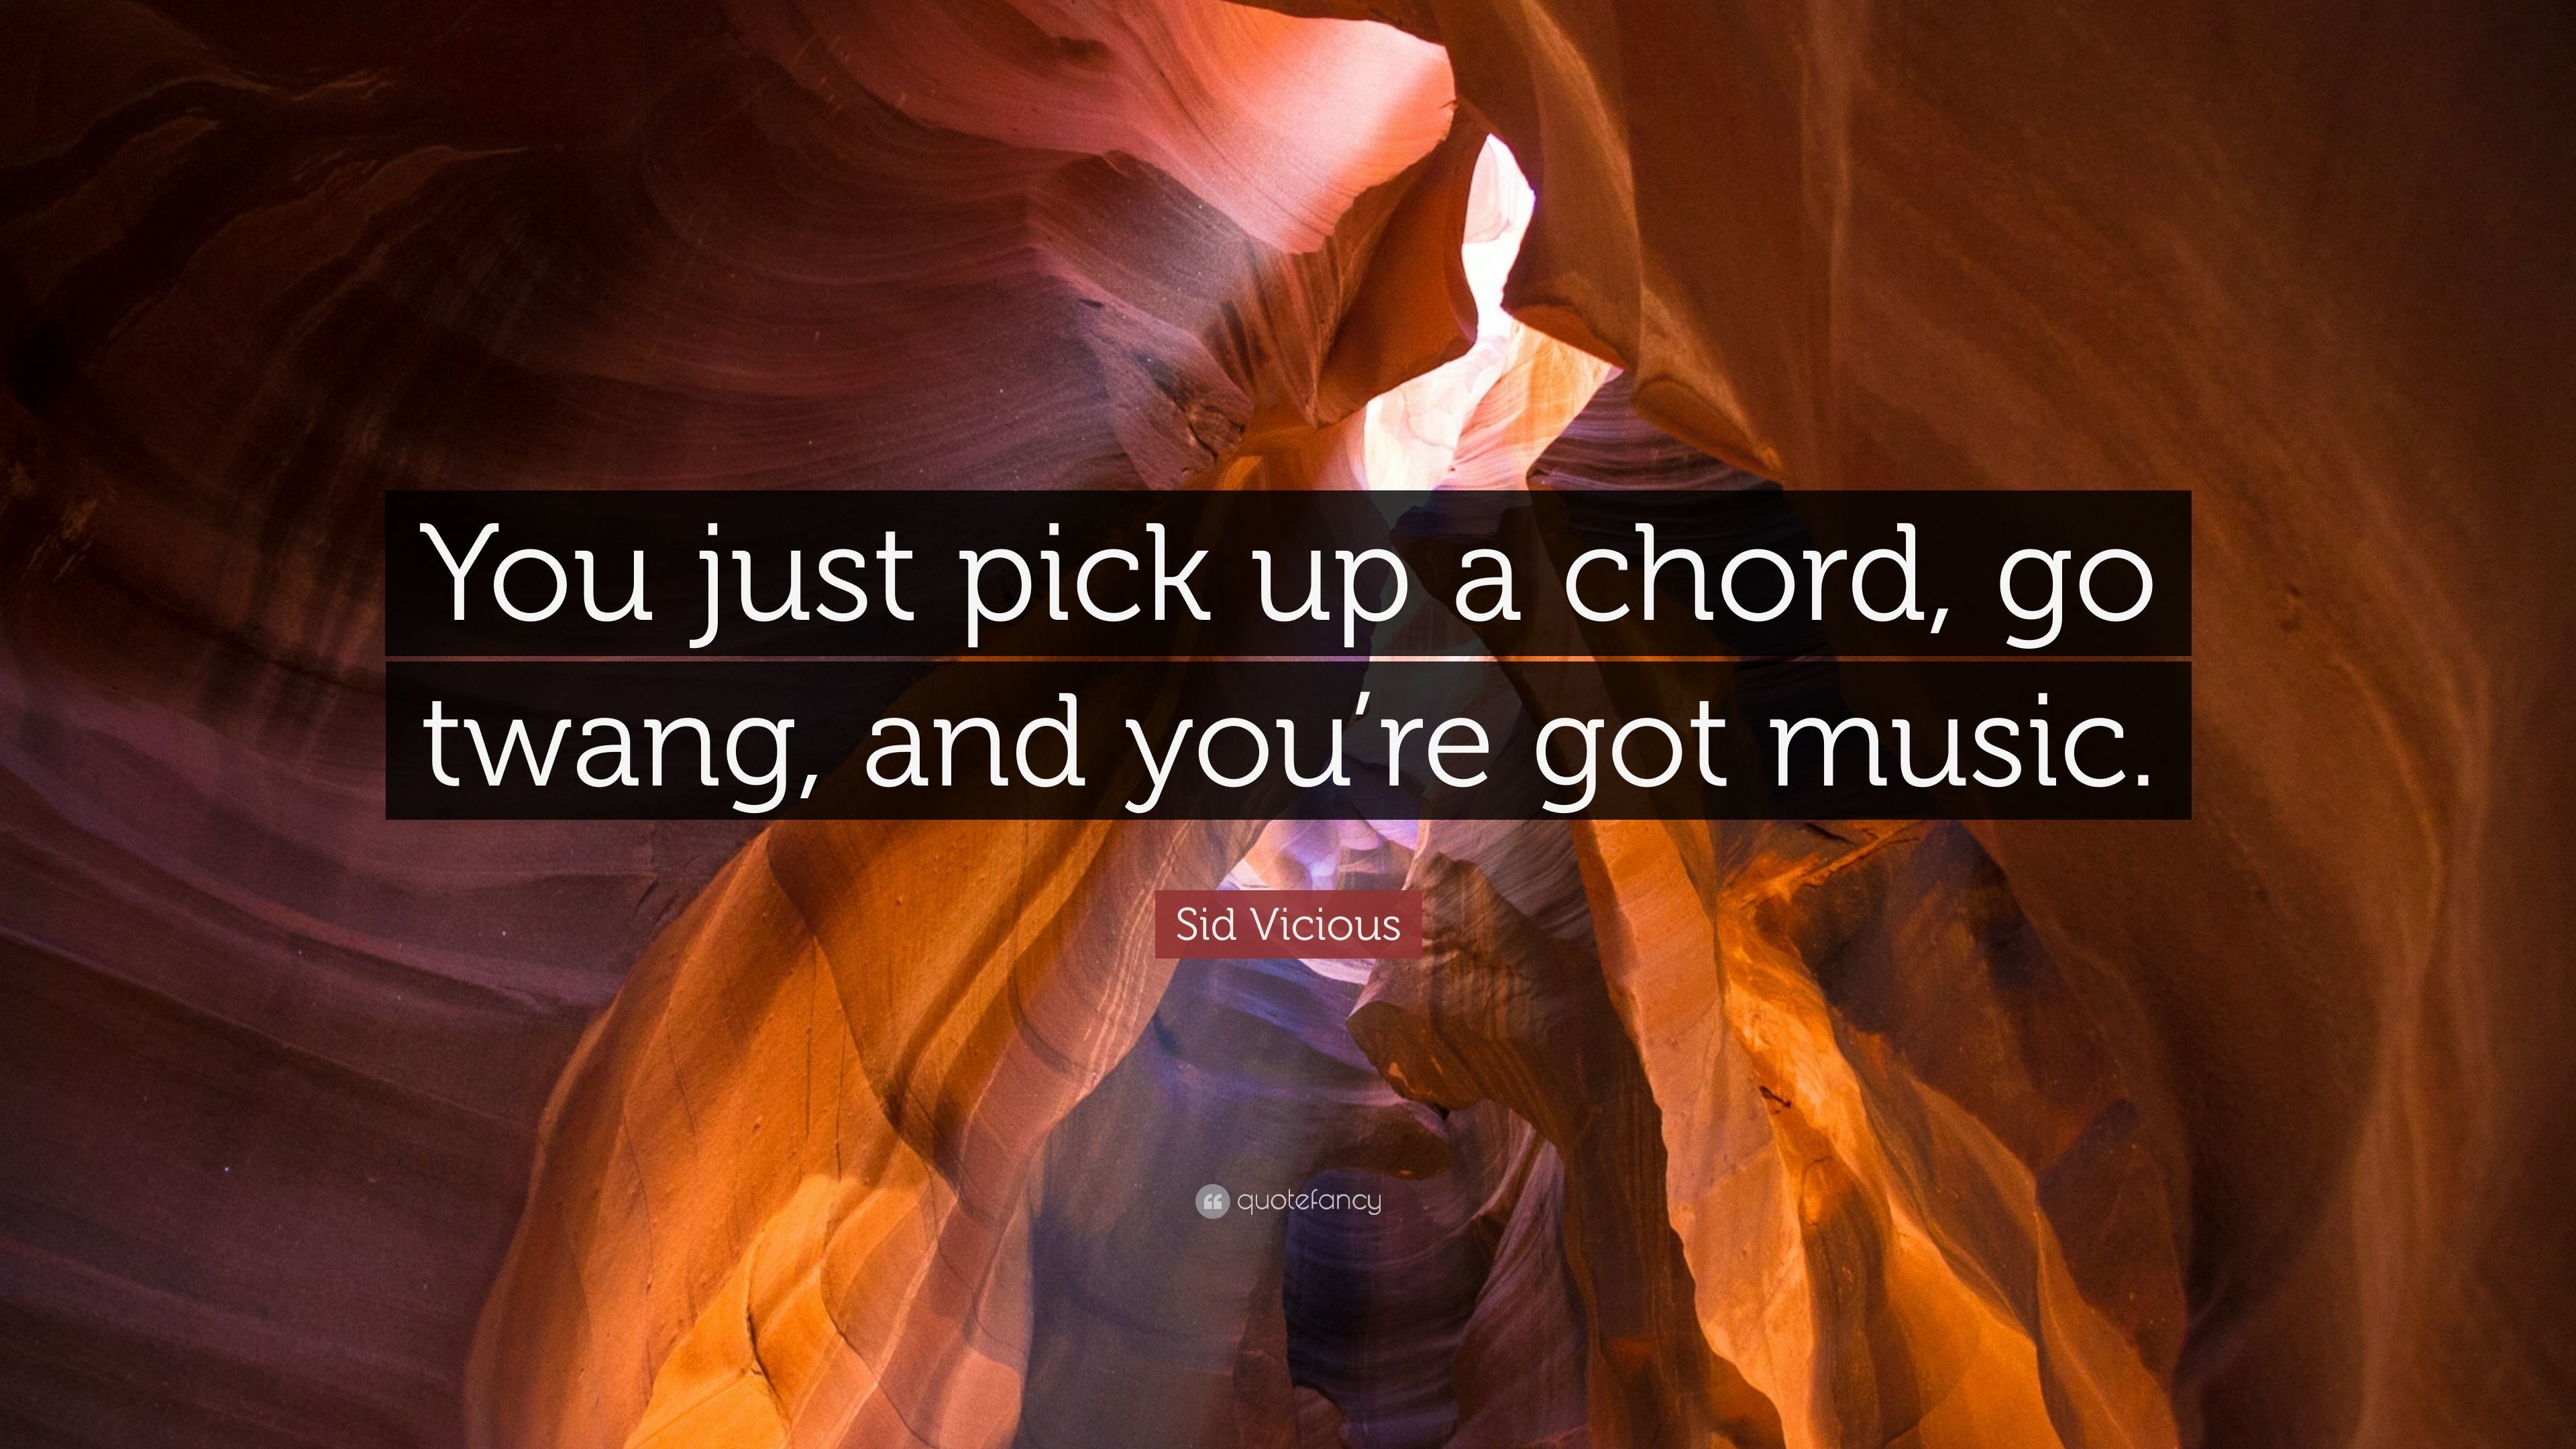 3840x2160 Sid Vicious Quote: “You just pick up a chord, go twang, and